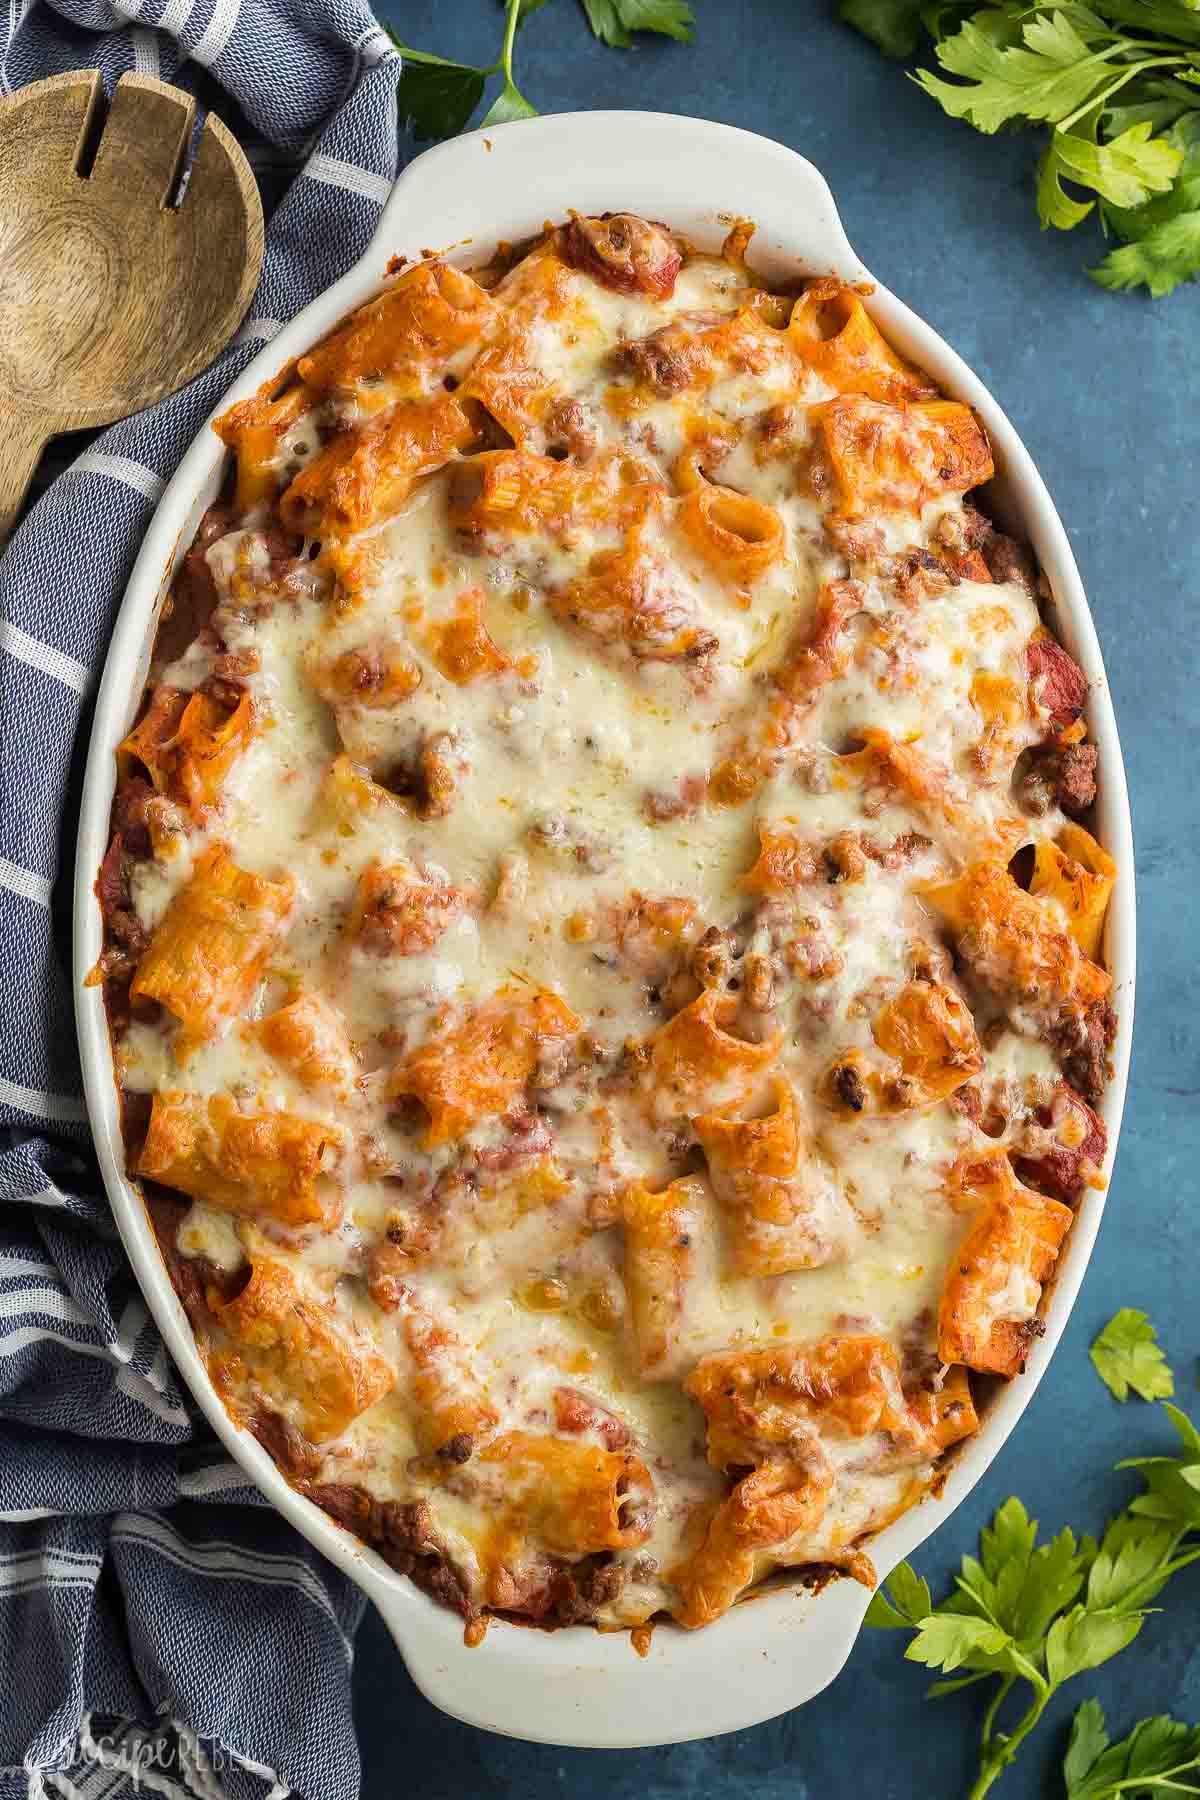 rigatoni pasta bake in white baking dish with blue towel on the side.